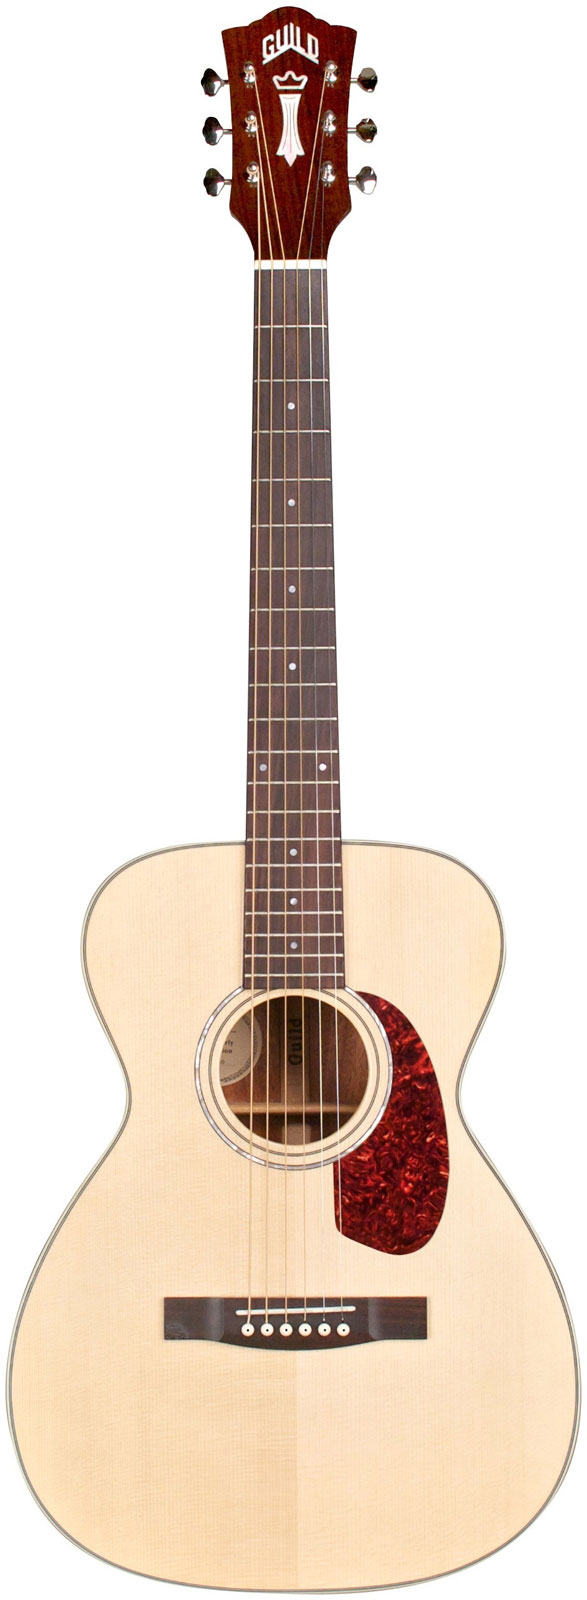 GUILD WESTERLY M-140 NATURAL